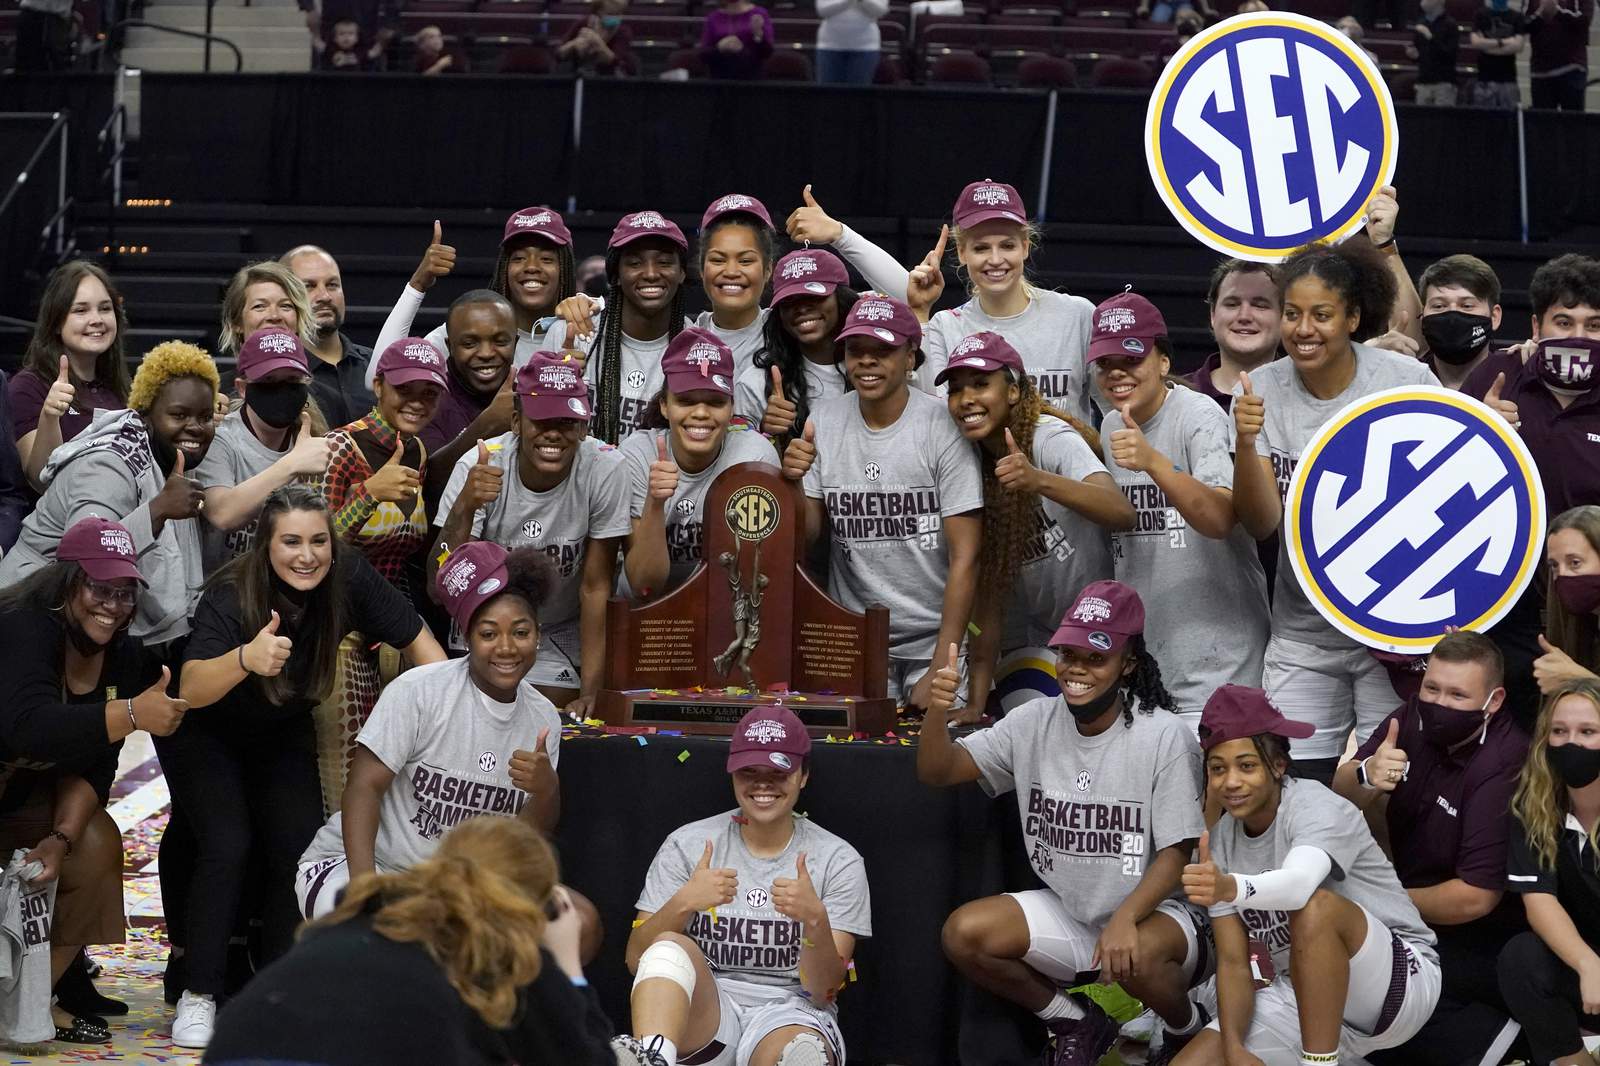 Aggies reach best-ever ranking of No. 2 in women's AP Top 25